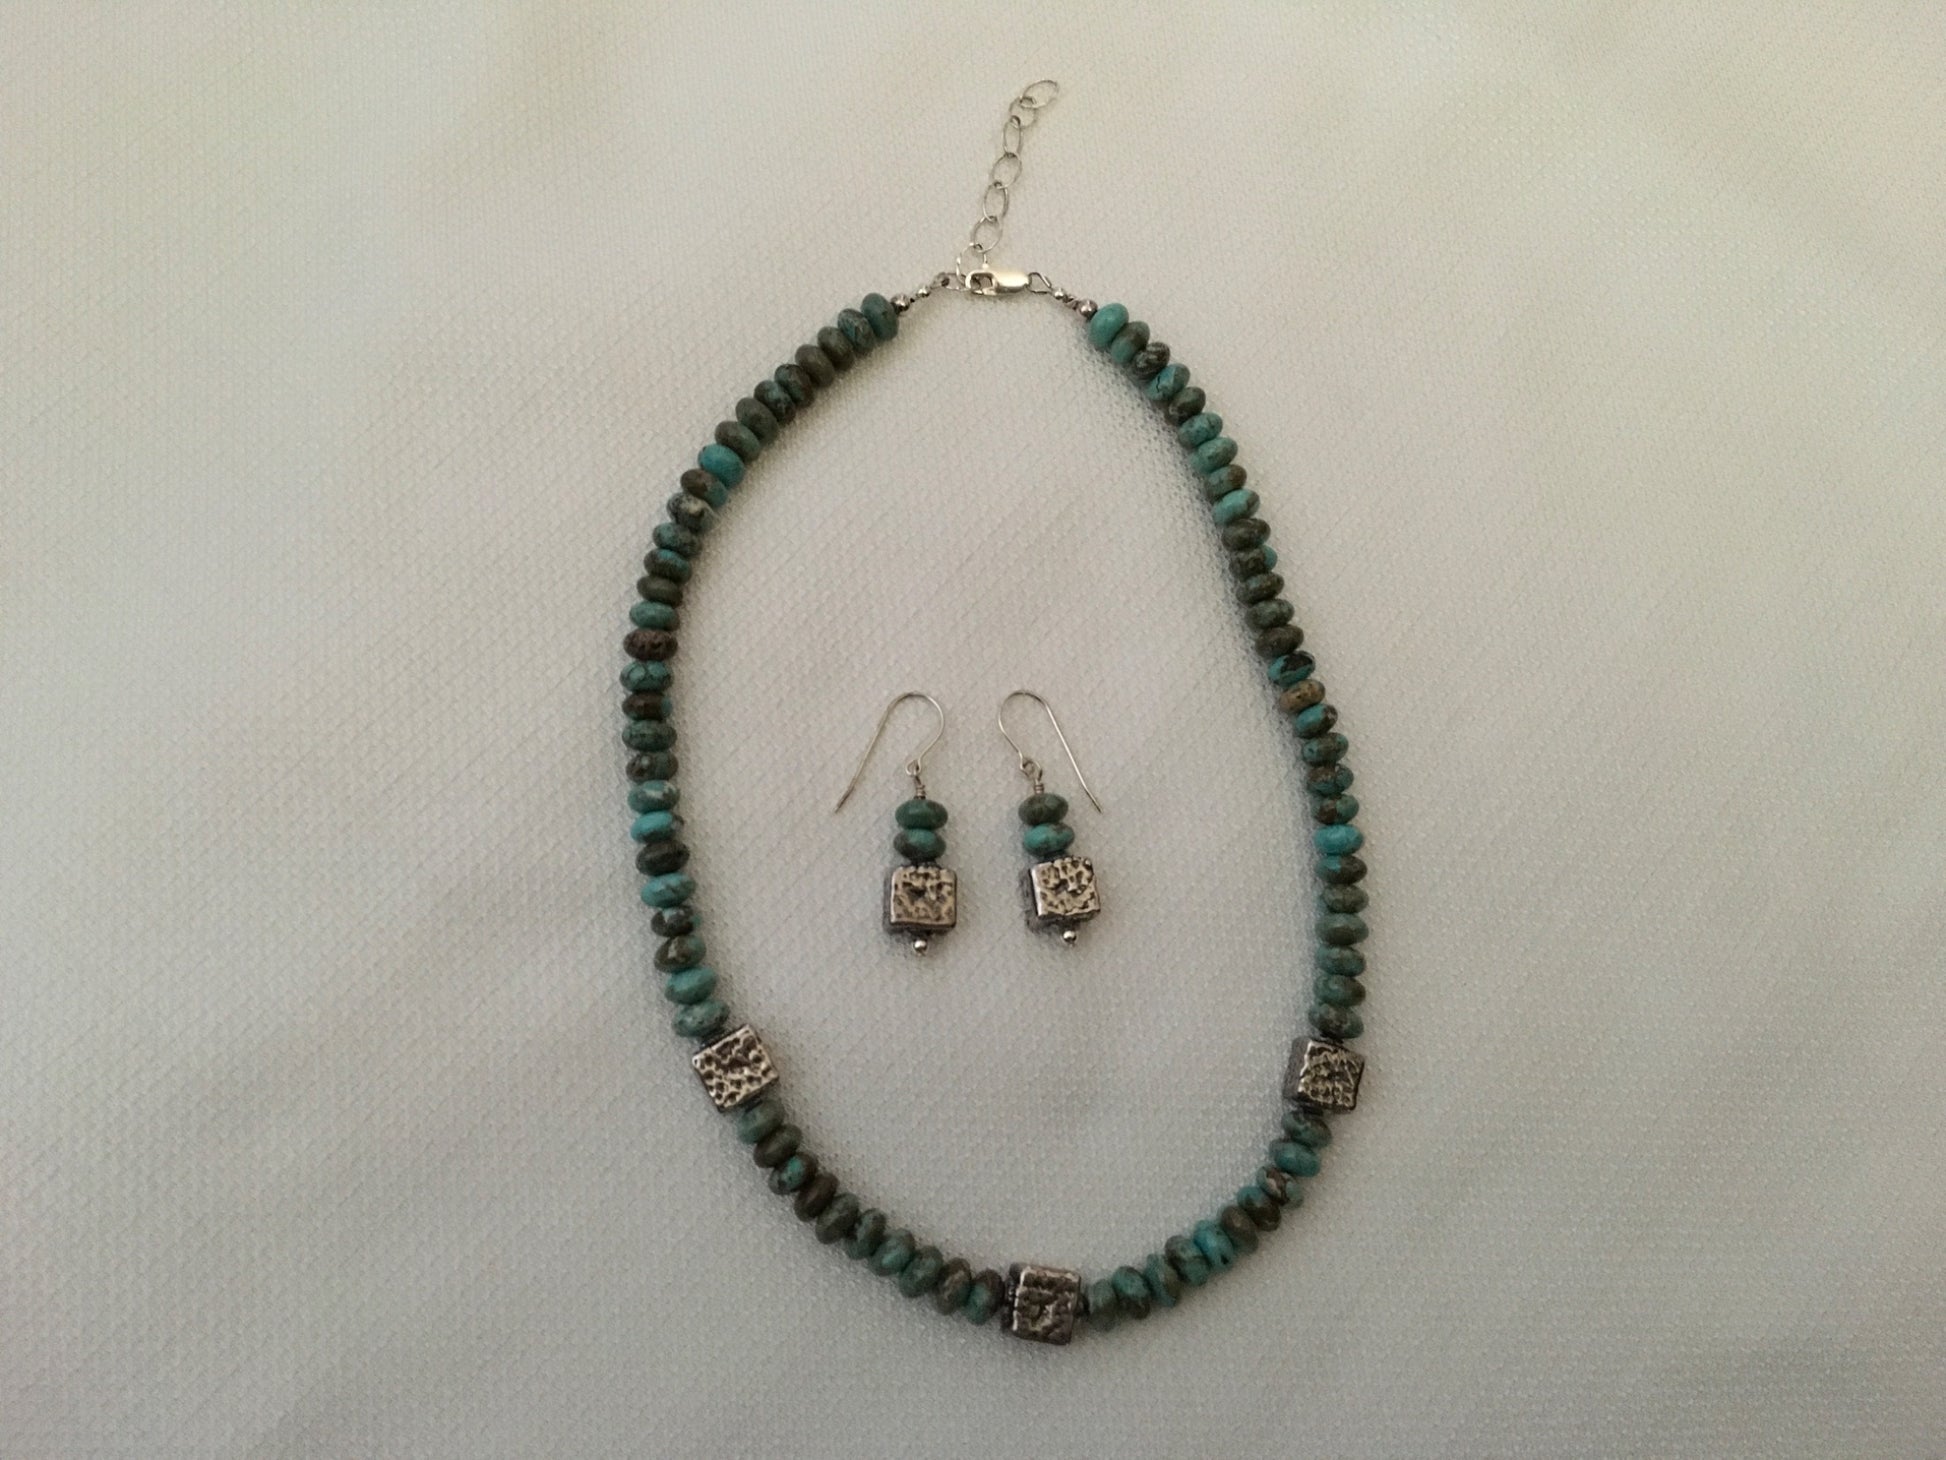 Turquoise and Sterling Silver Necklace and Earrings Set - 3